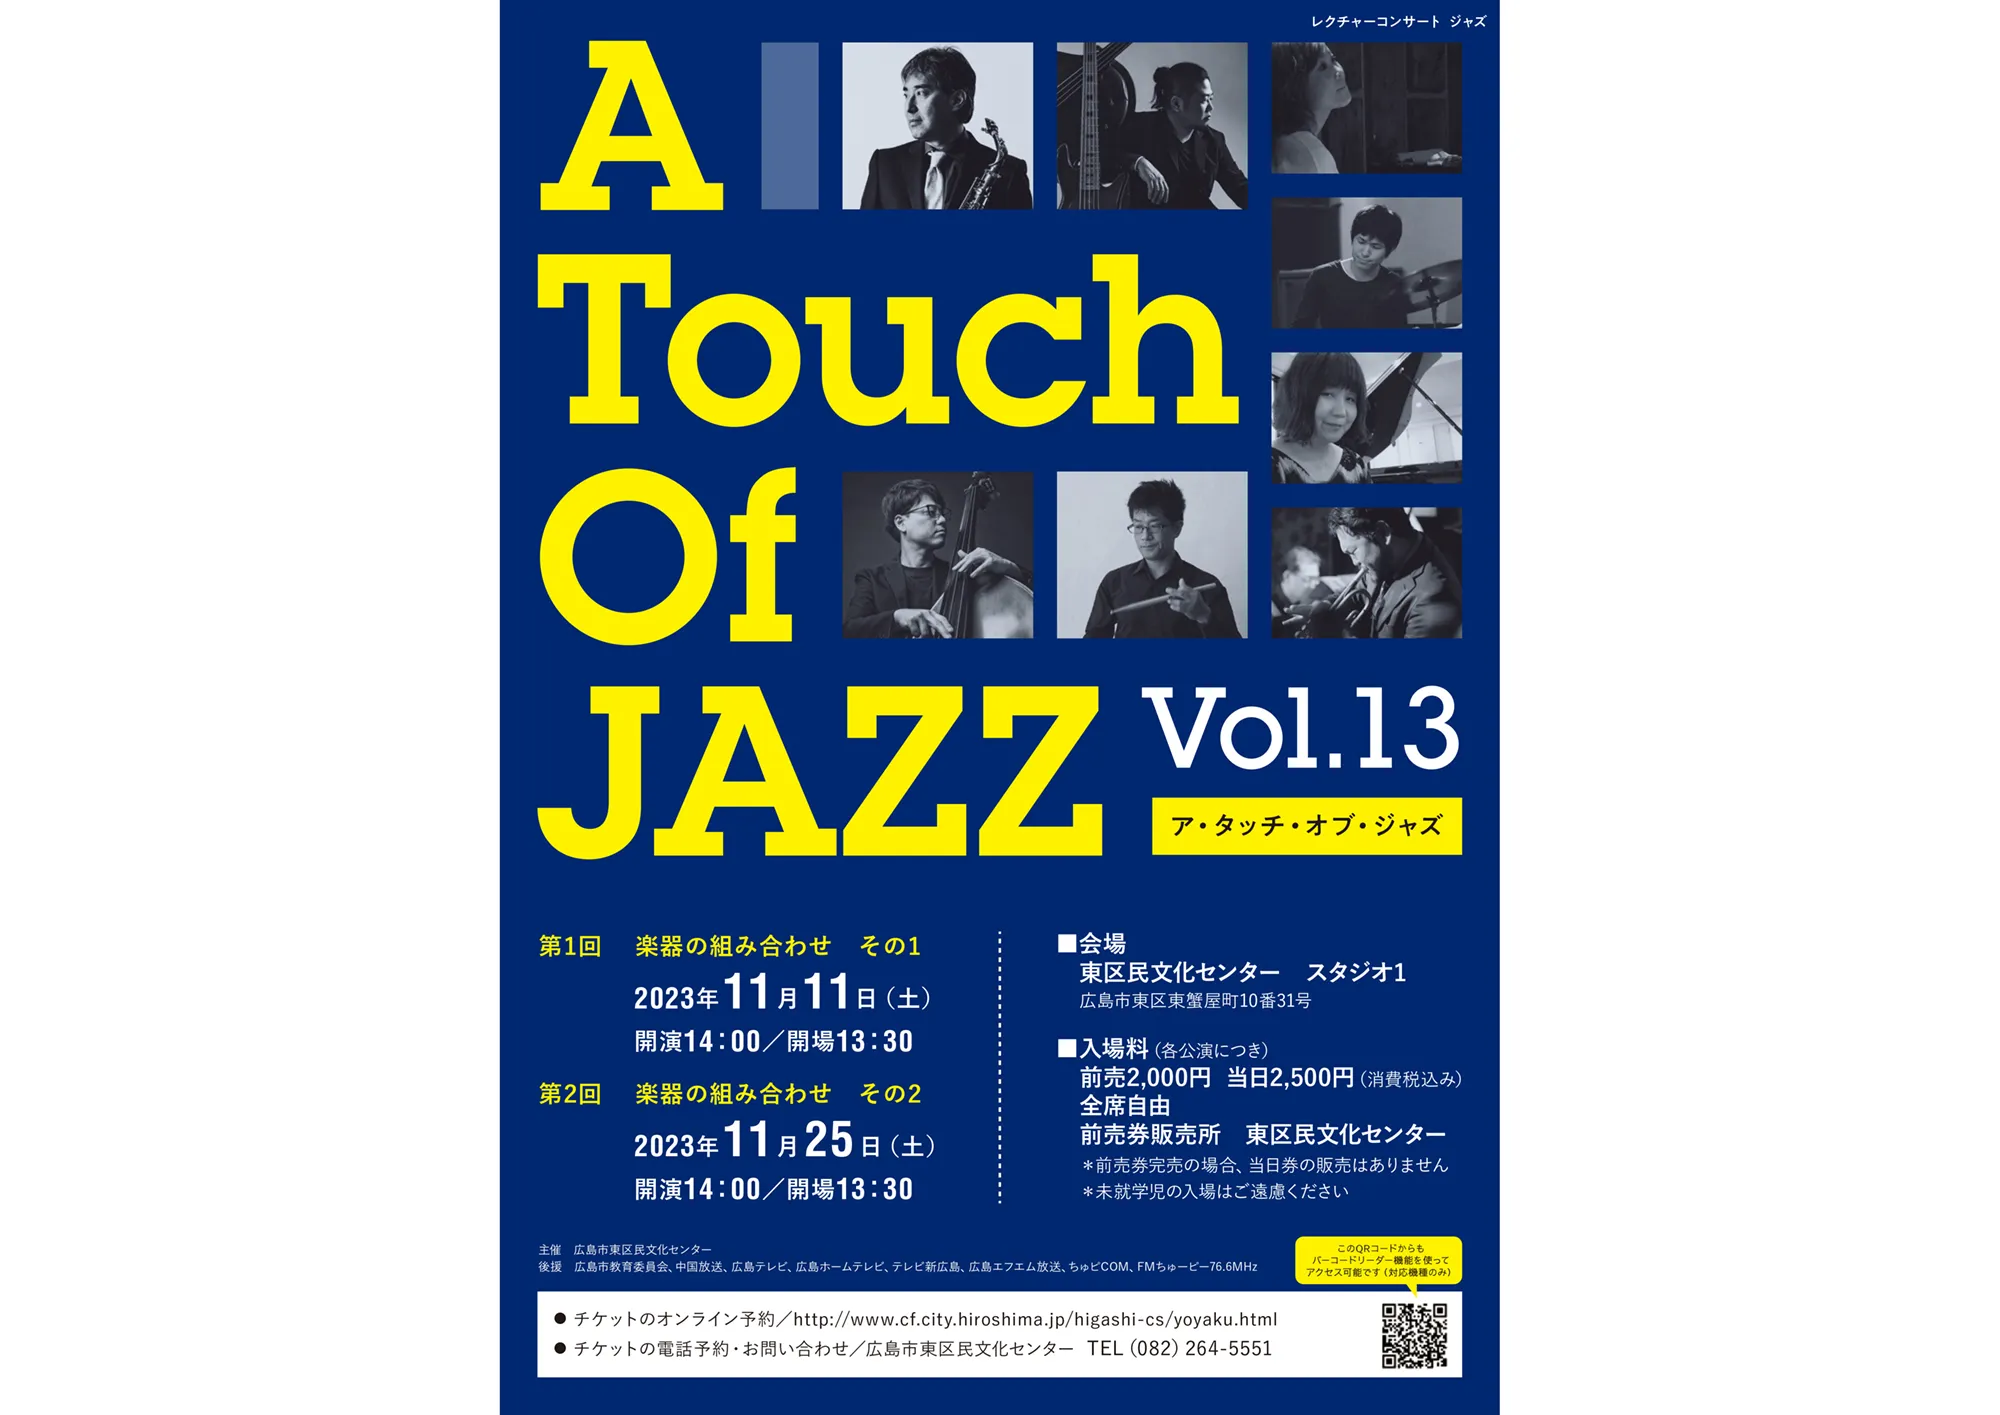 A Touch Of JAZZ イベントフライヤー表